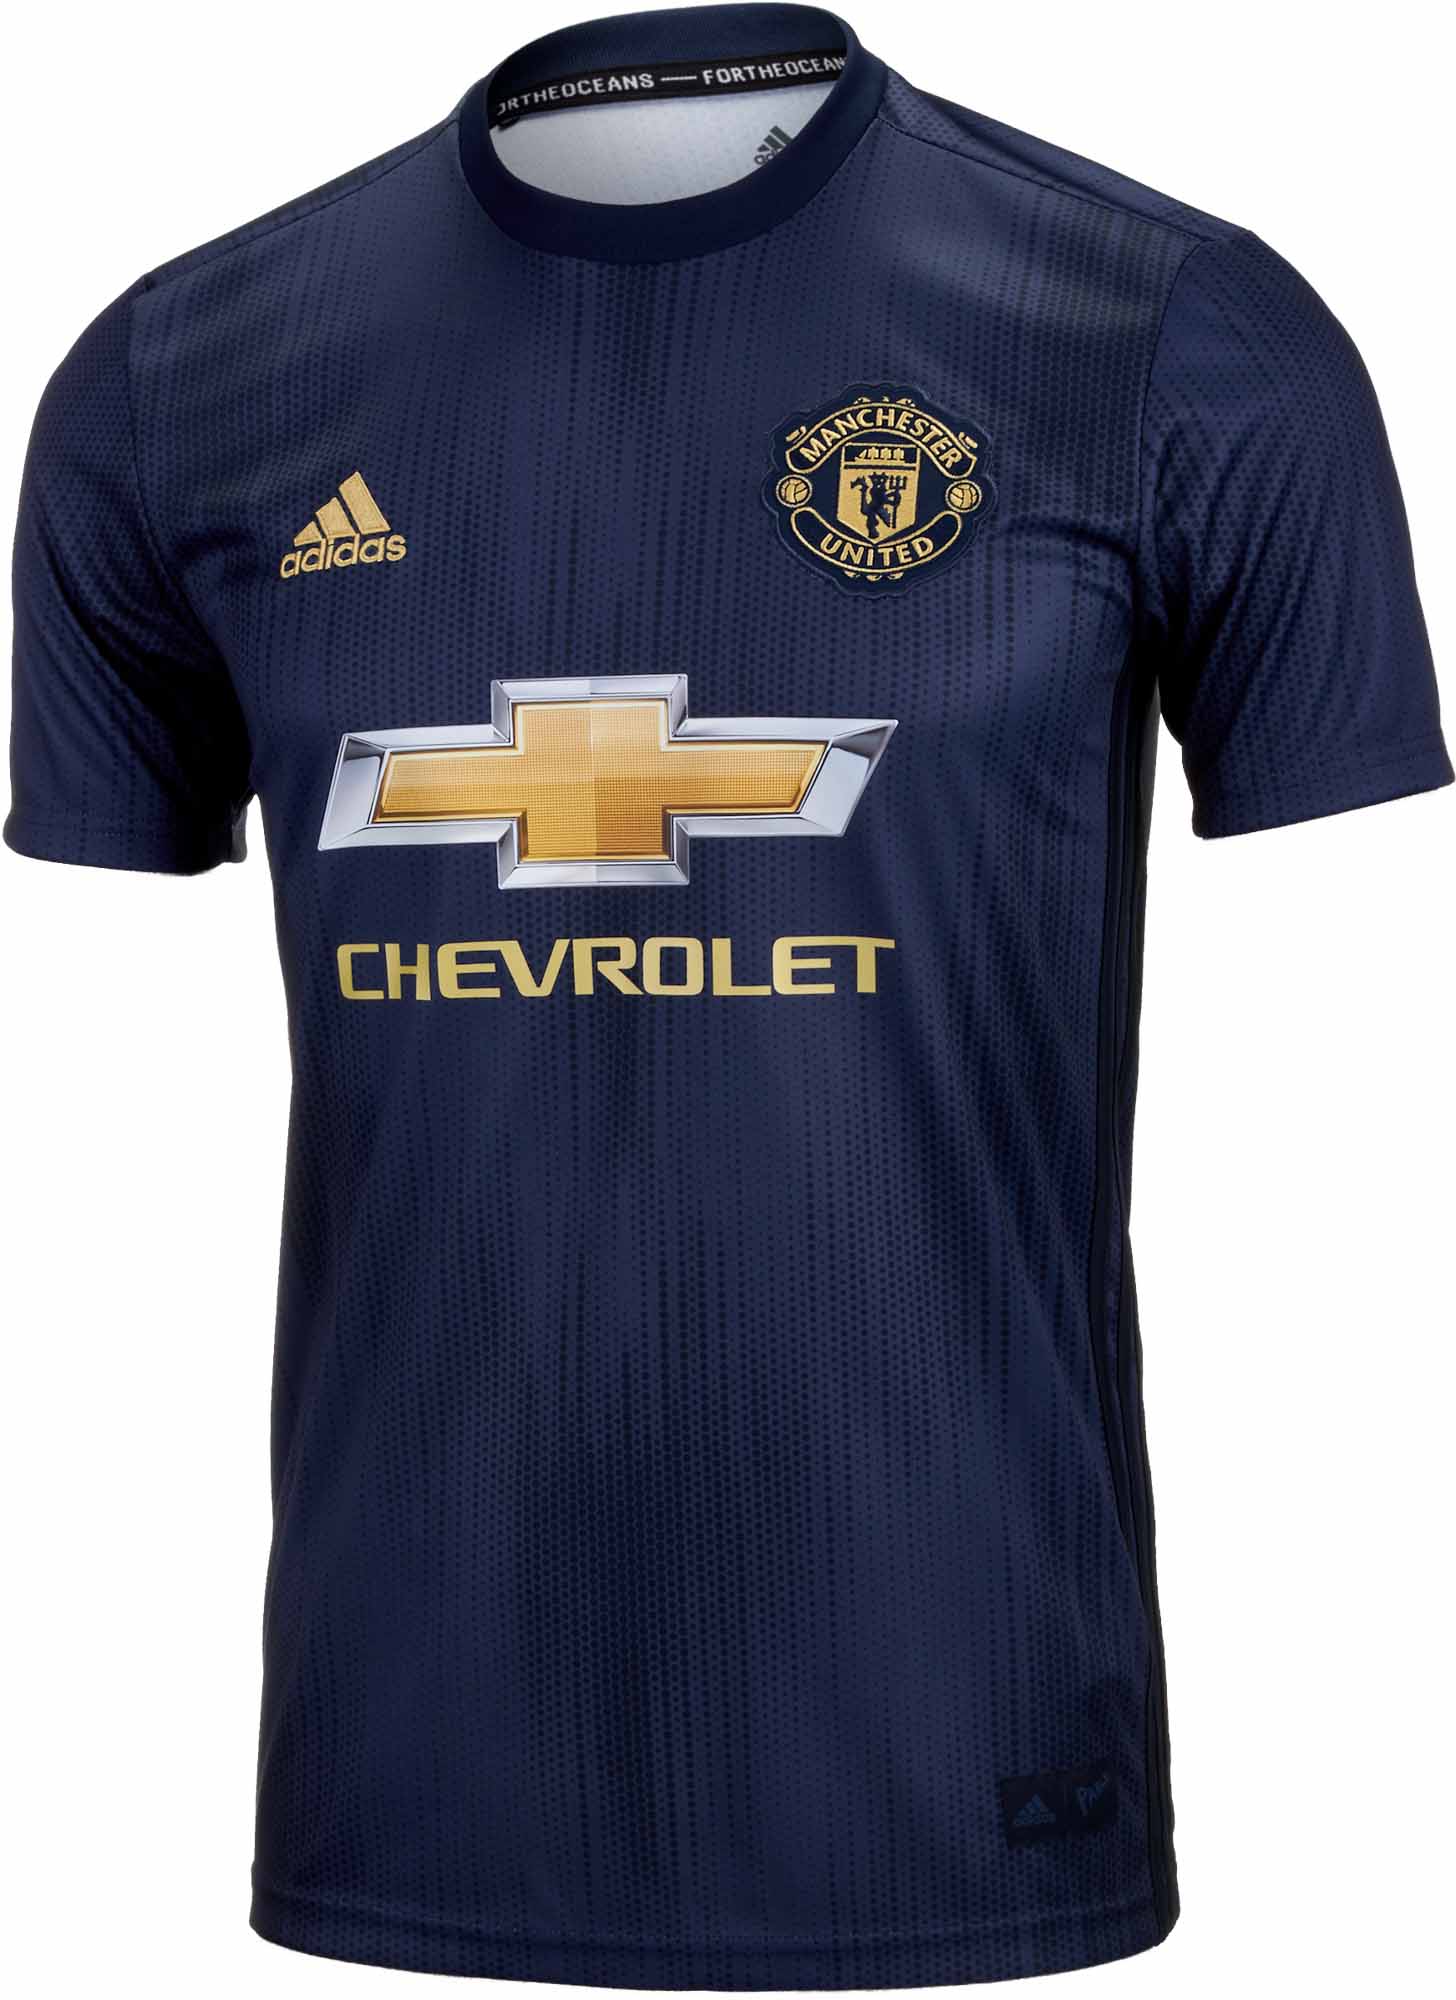 dutje analyseren ontsmettingsmiddel adidas Manchester United 3rd Jersey - Youth 2018-19 - SoccerPro